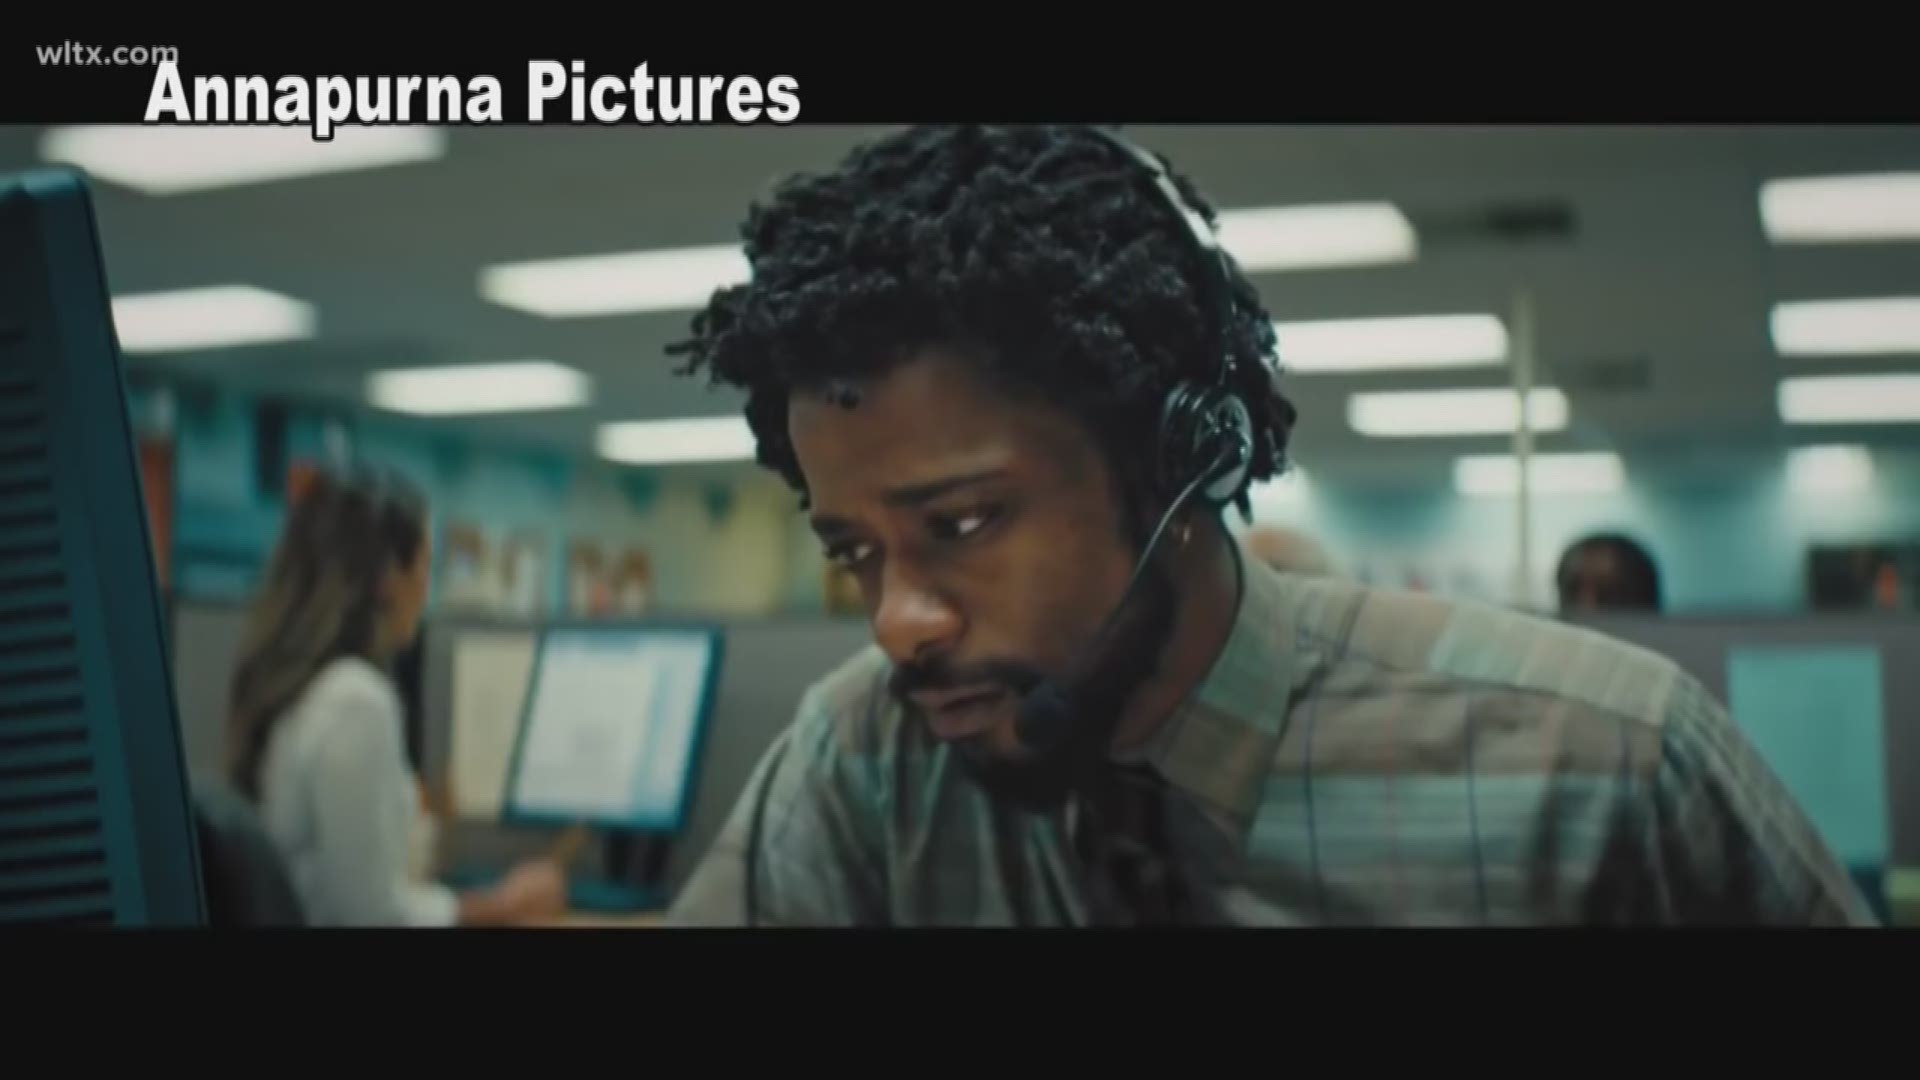 Director Boots Riley re-writes the world of telemarketing in "Sorry to Bother You."